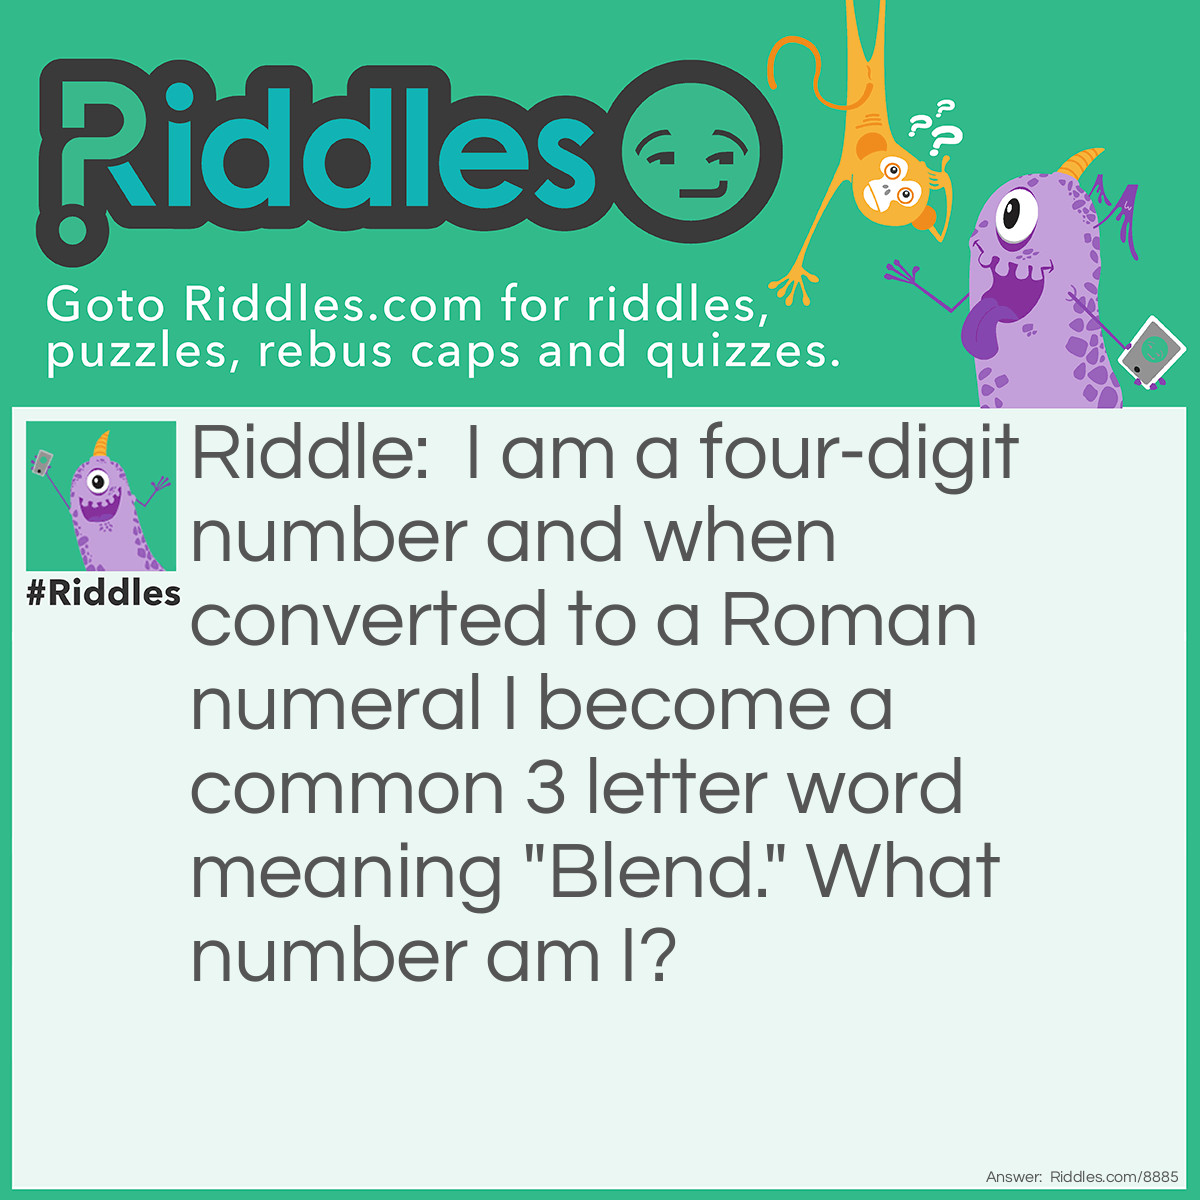 Riddle: I am a four-digit number and when converted to a Roman numeral I become a common 3 letter word meaning "Blend." What number am I? Answer: 1009 means MIX IX=9 M=1000.